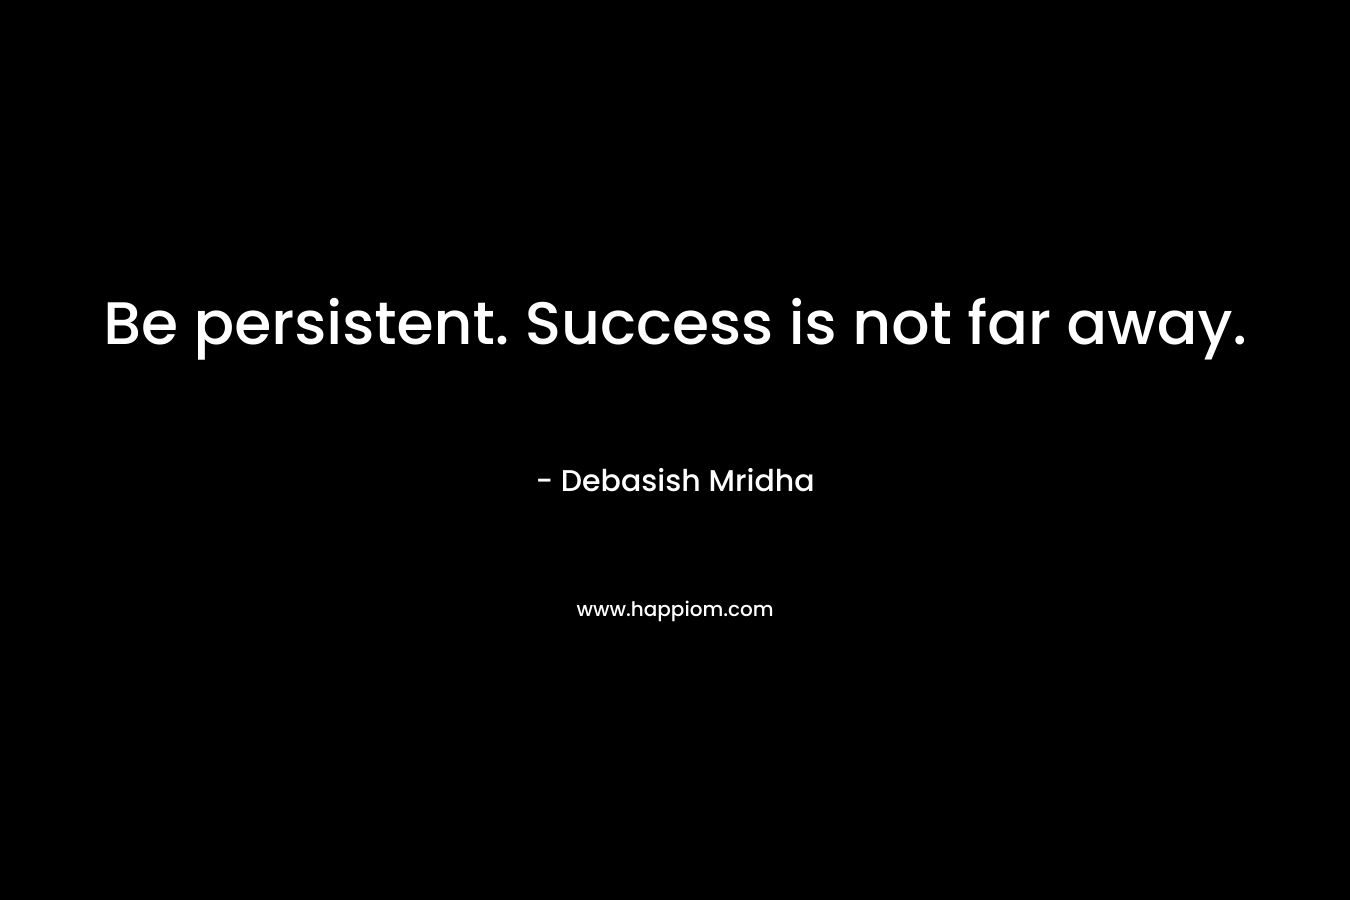 Be persistent. Success is not far away.